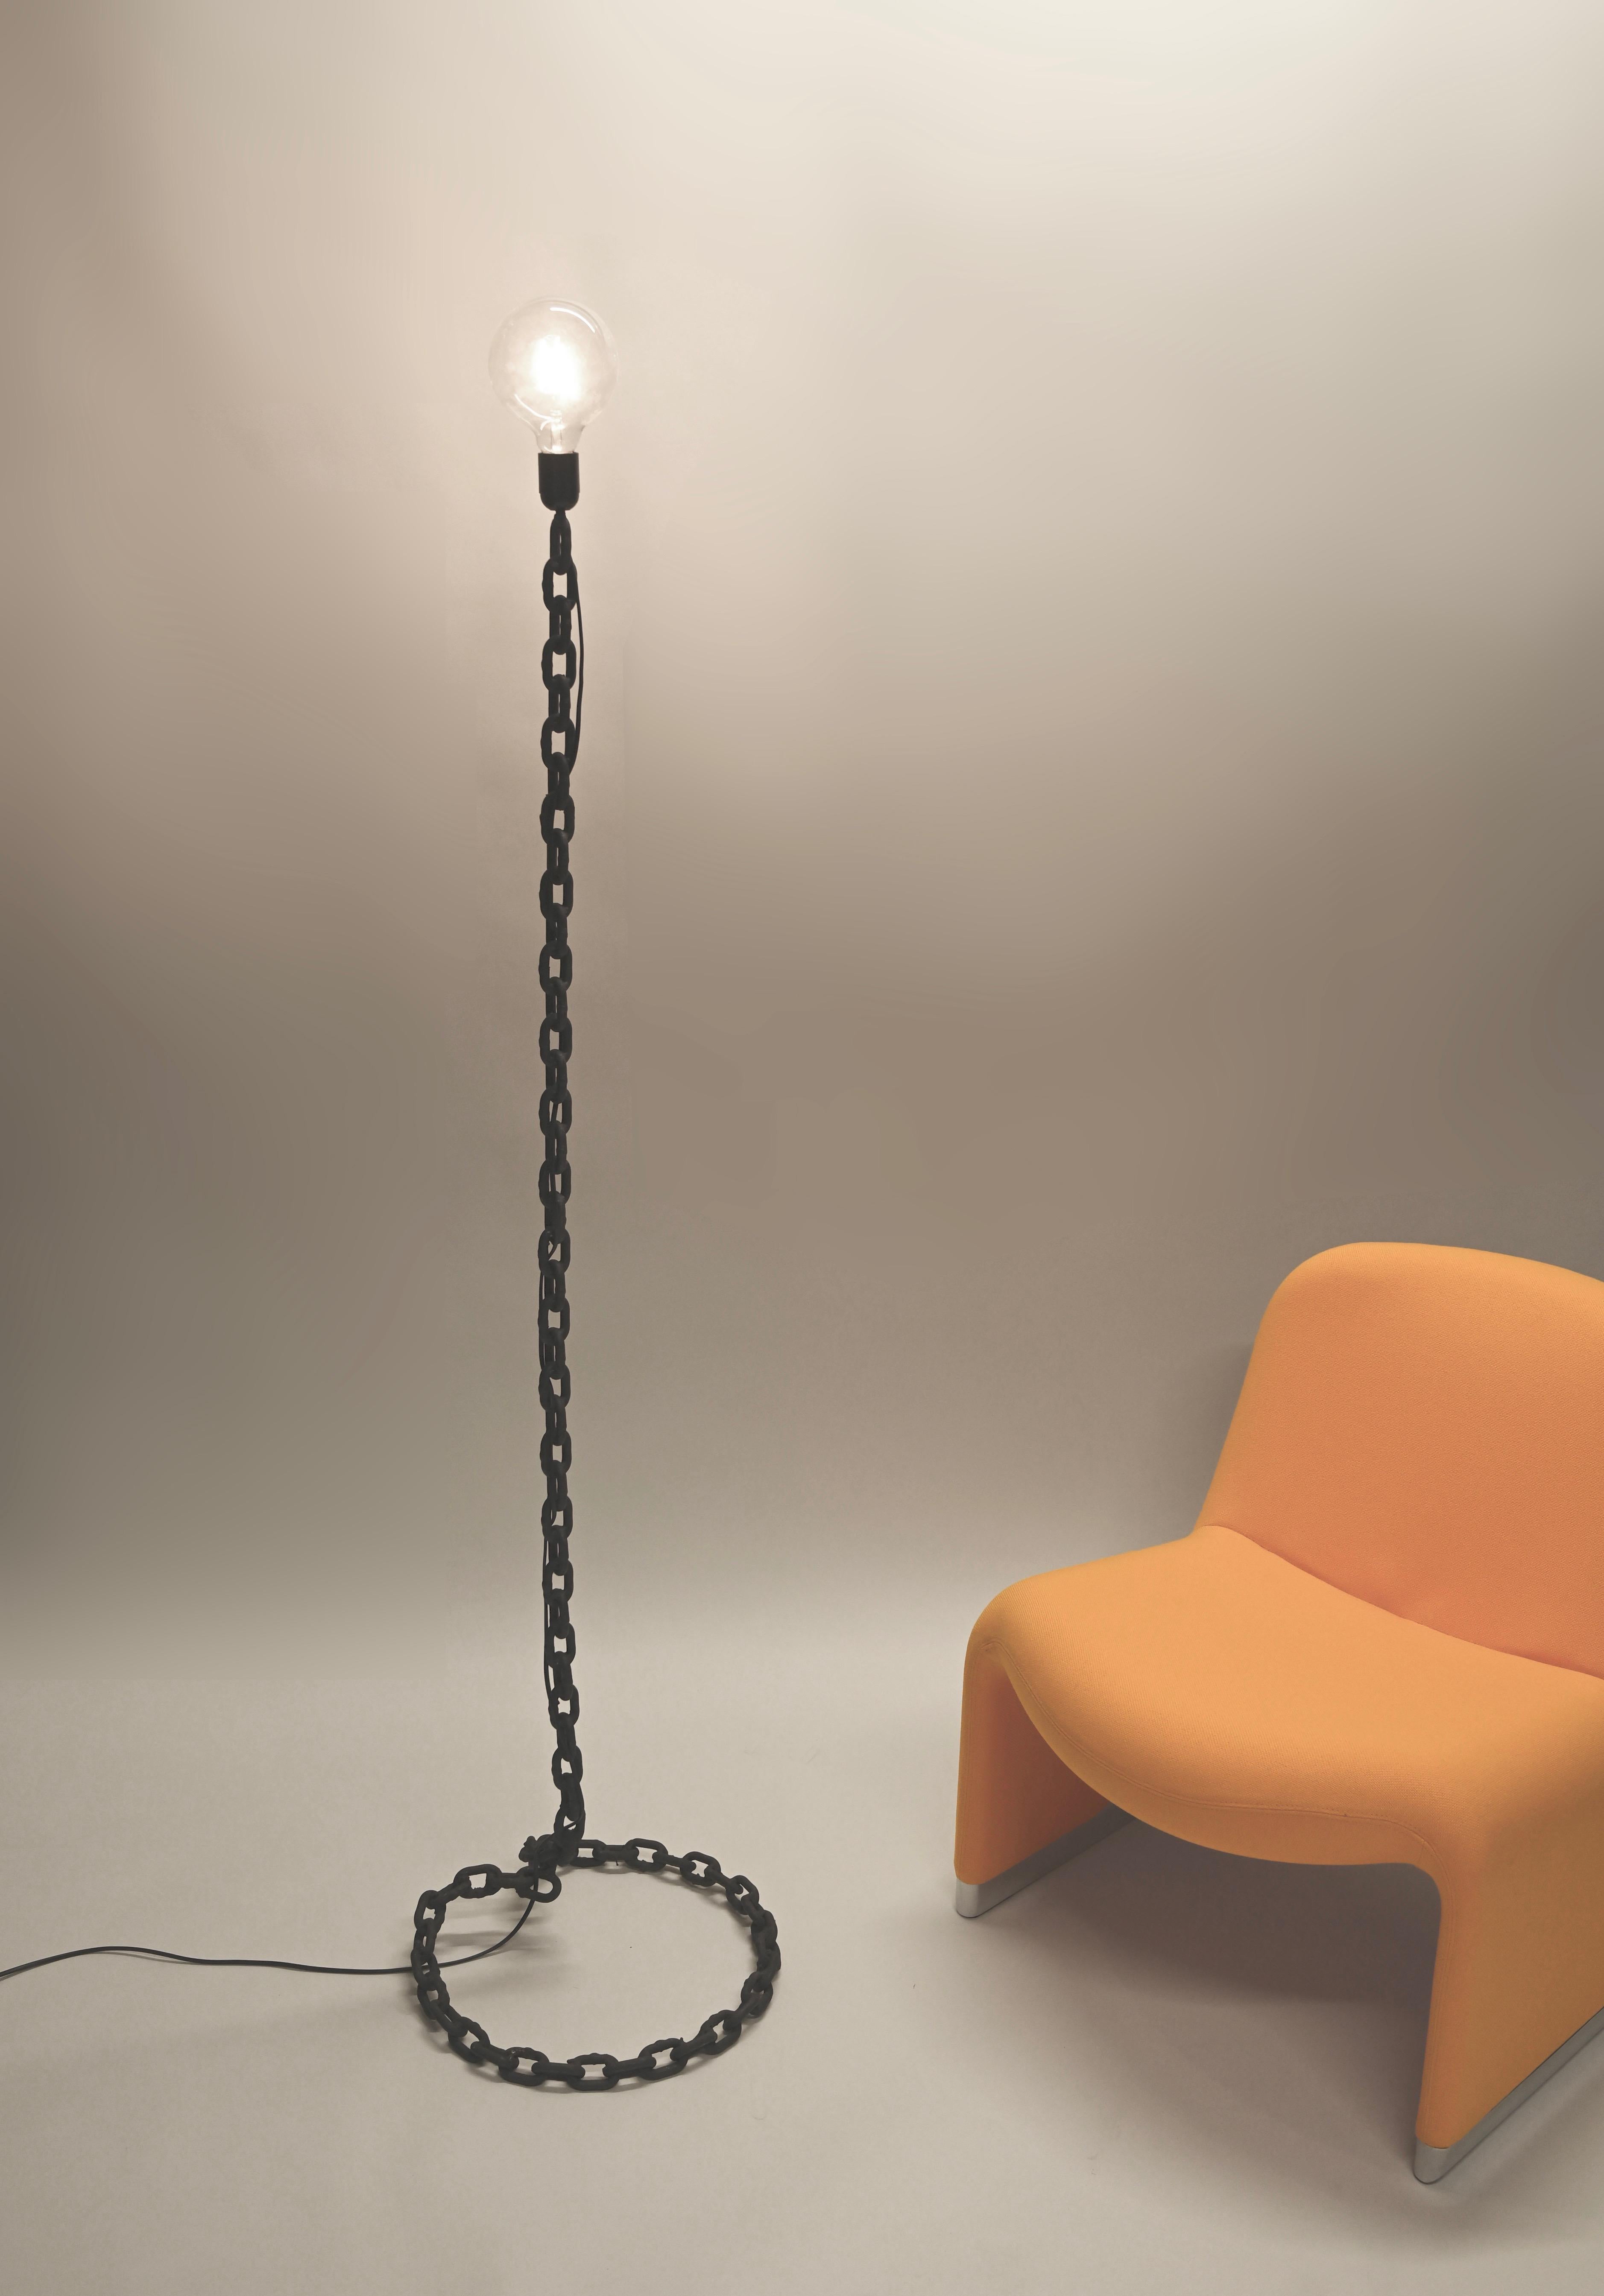 Franz West Brutalist Midcentury Chain Floor Lamp, Italy 1970s  For Sale 3